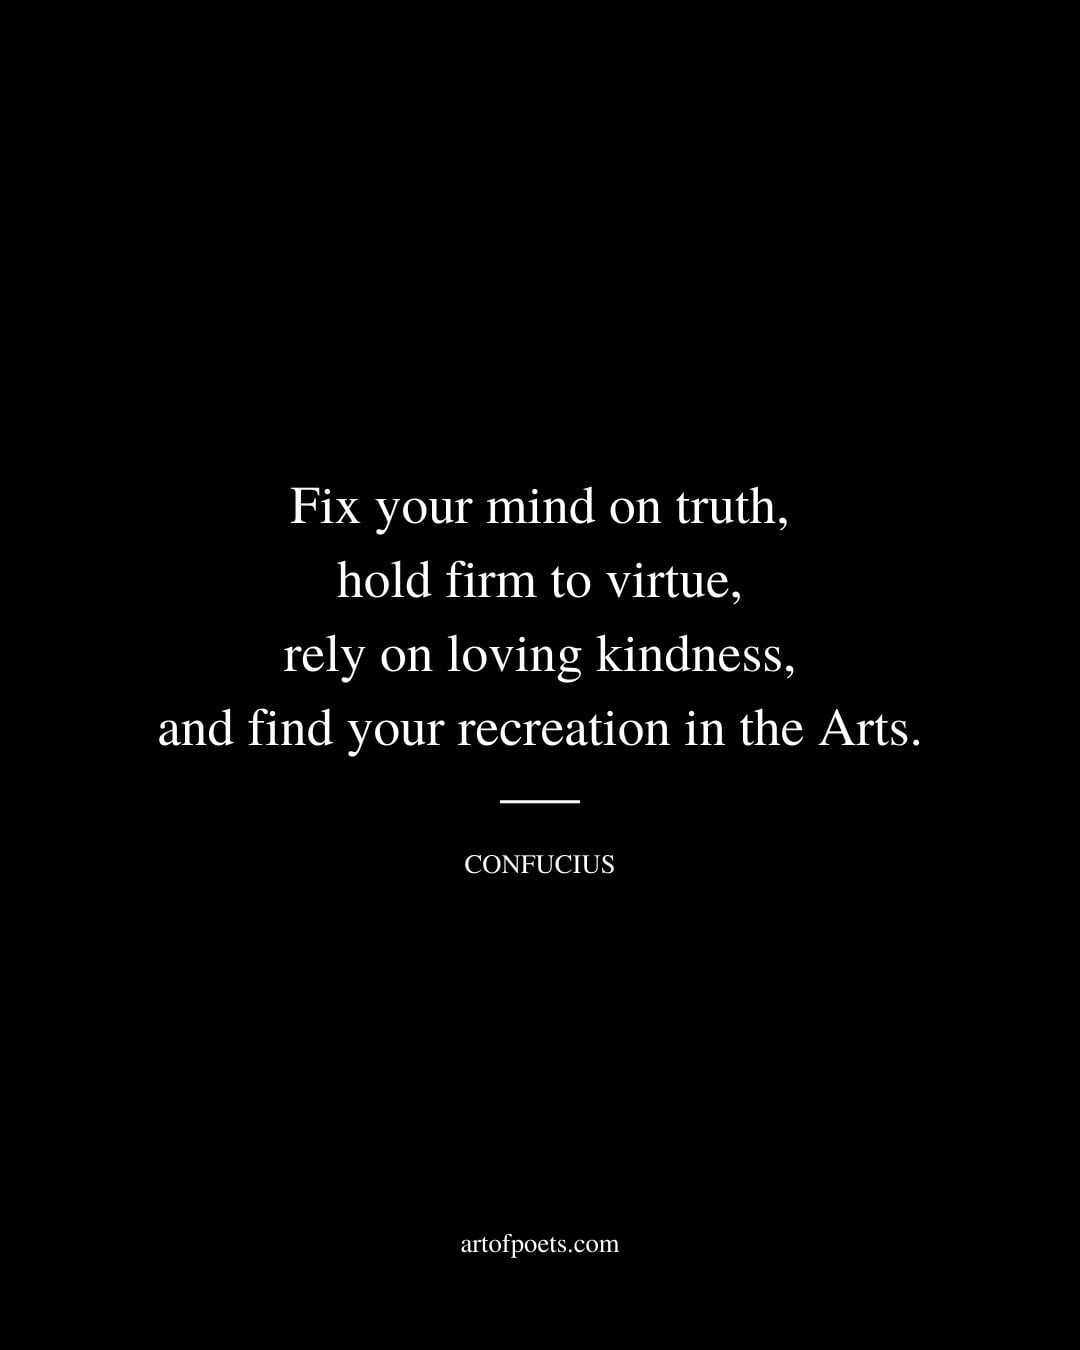 Fix your mind on truth hold firm to virtue rely on loving kindness and find your recreation in the Arts